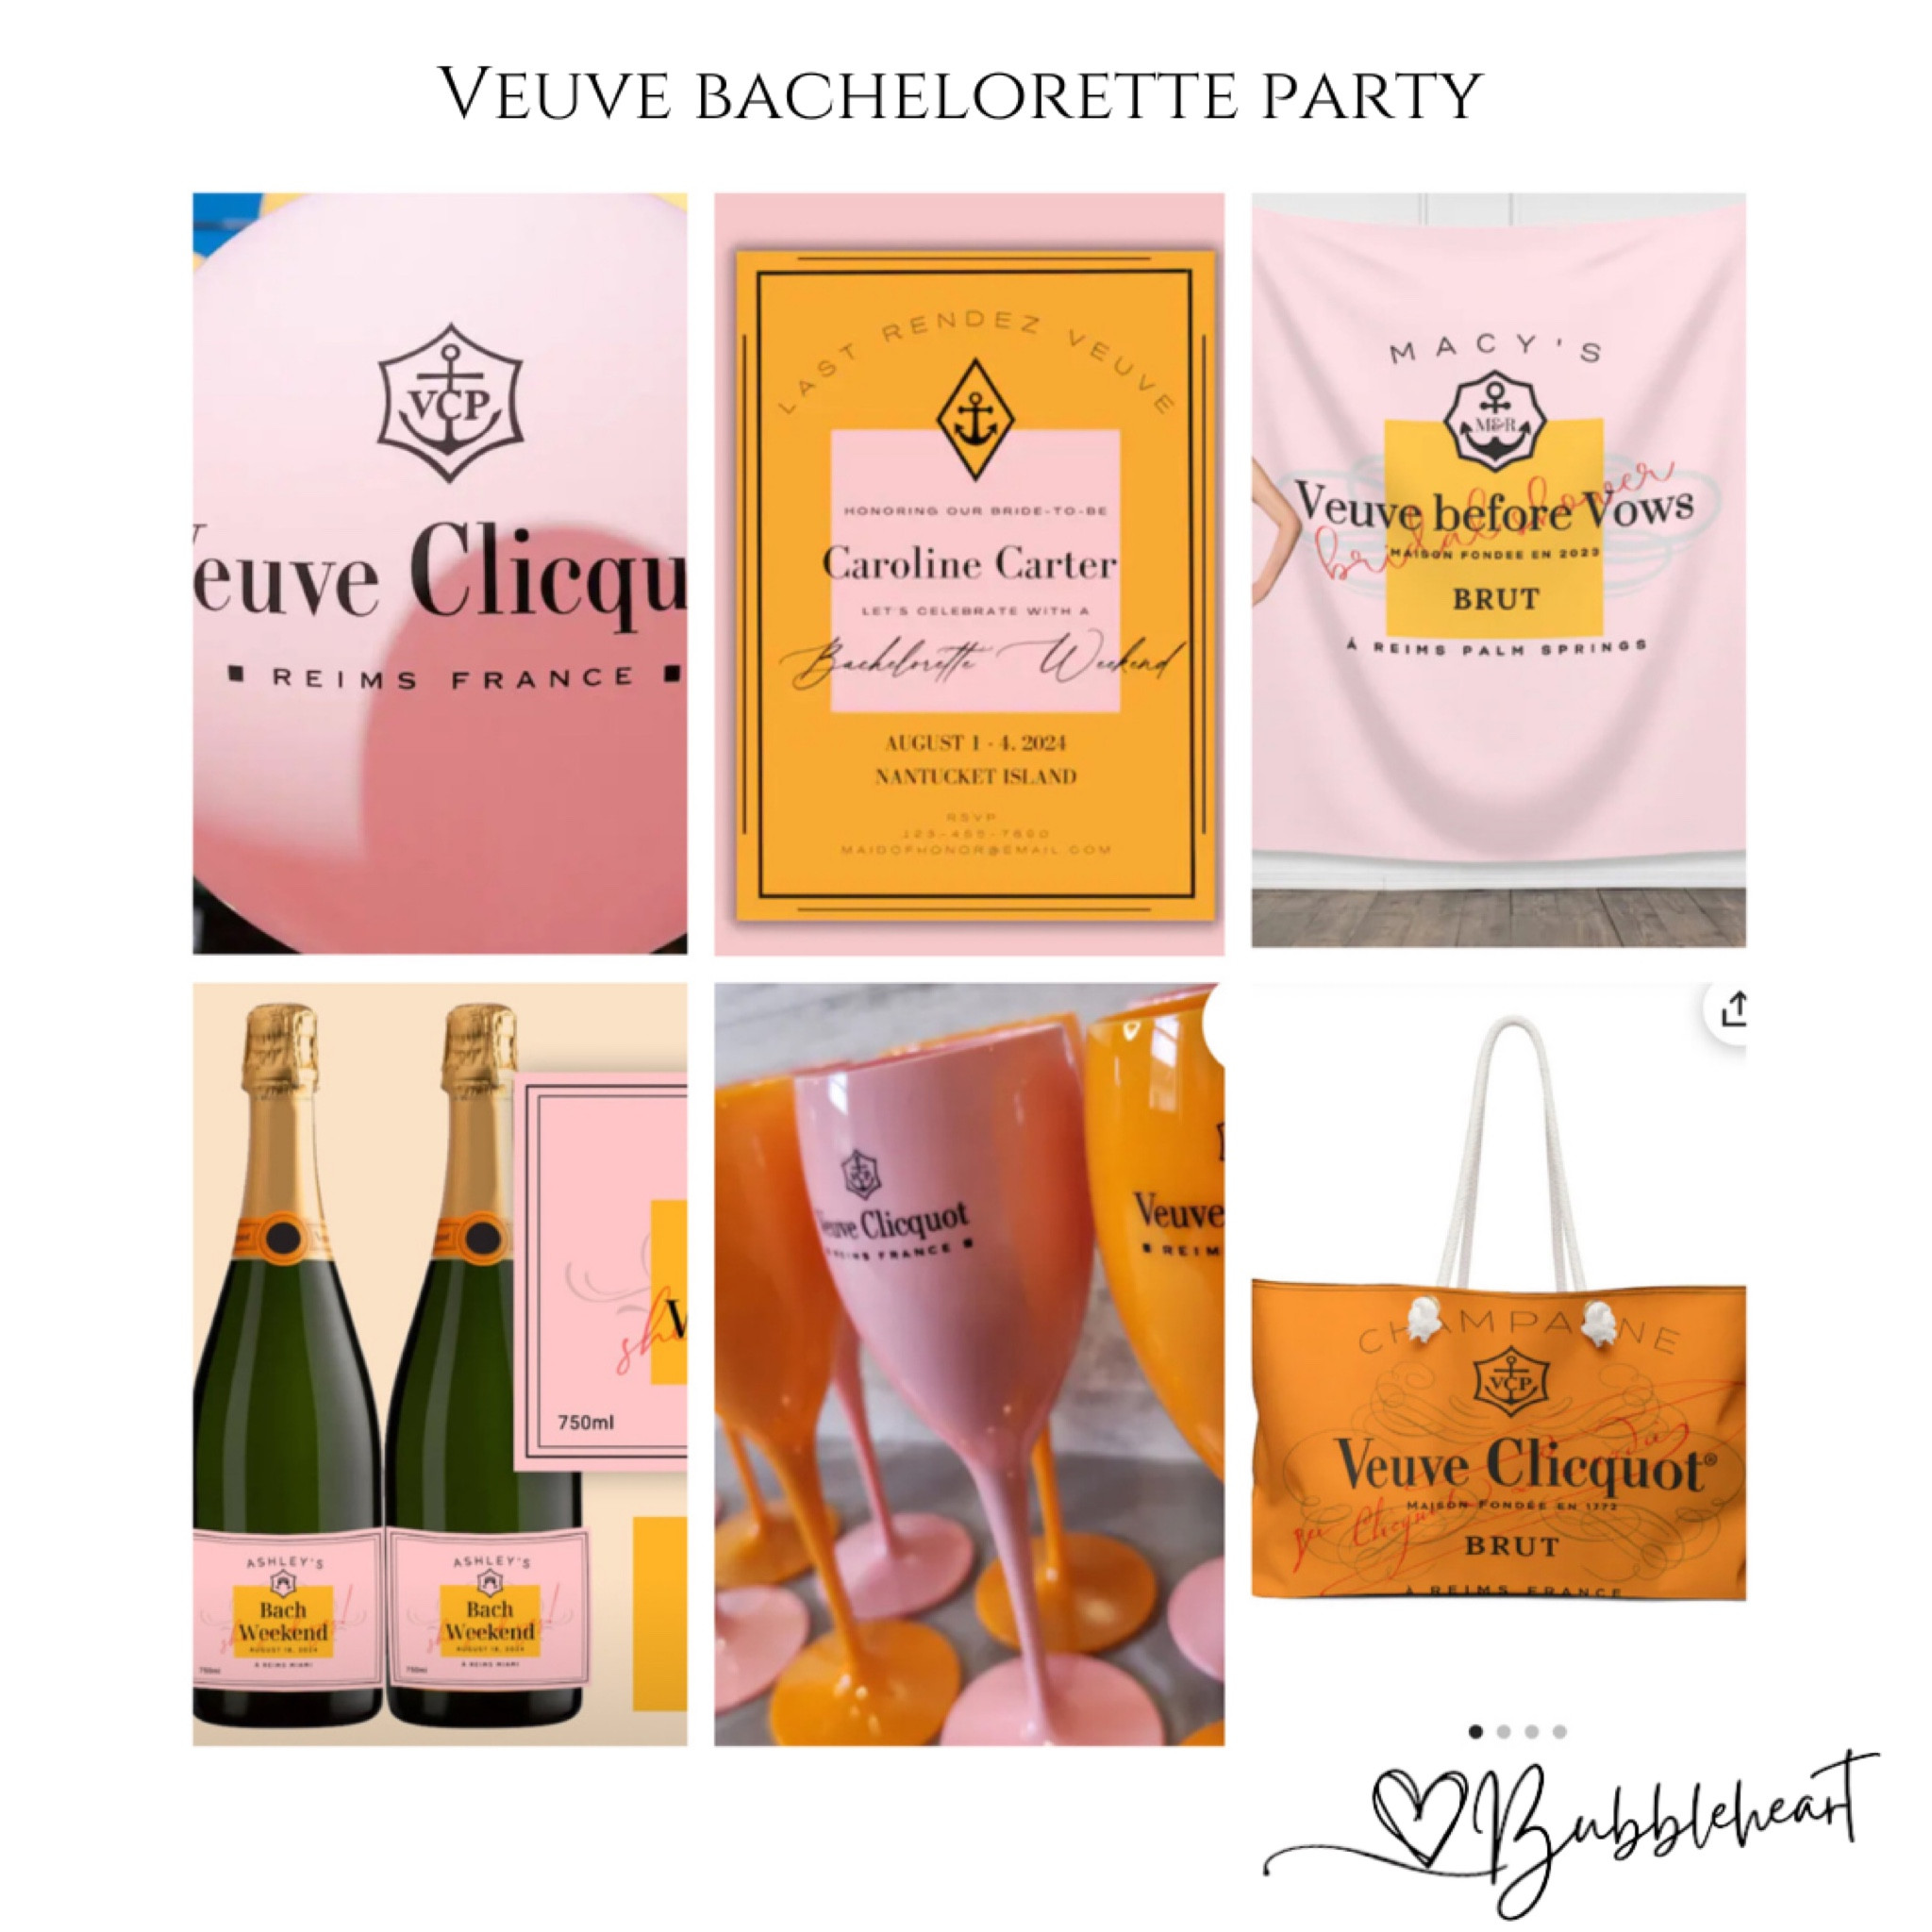 Veuve Clicquot inspired birthday party! Such fun